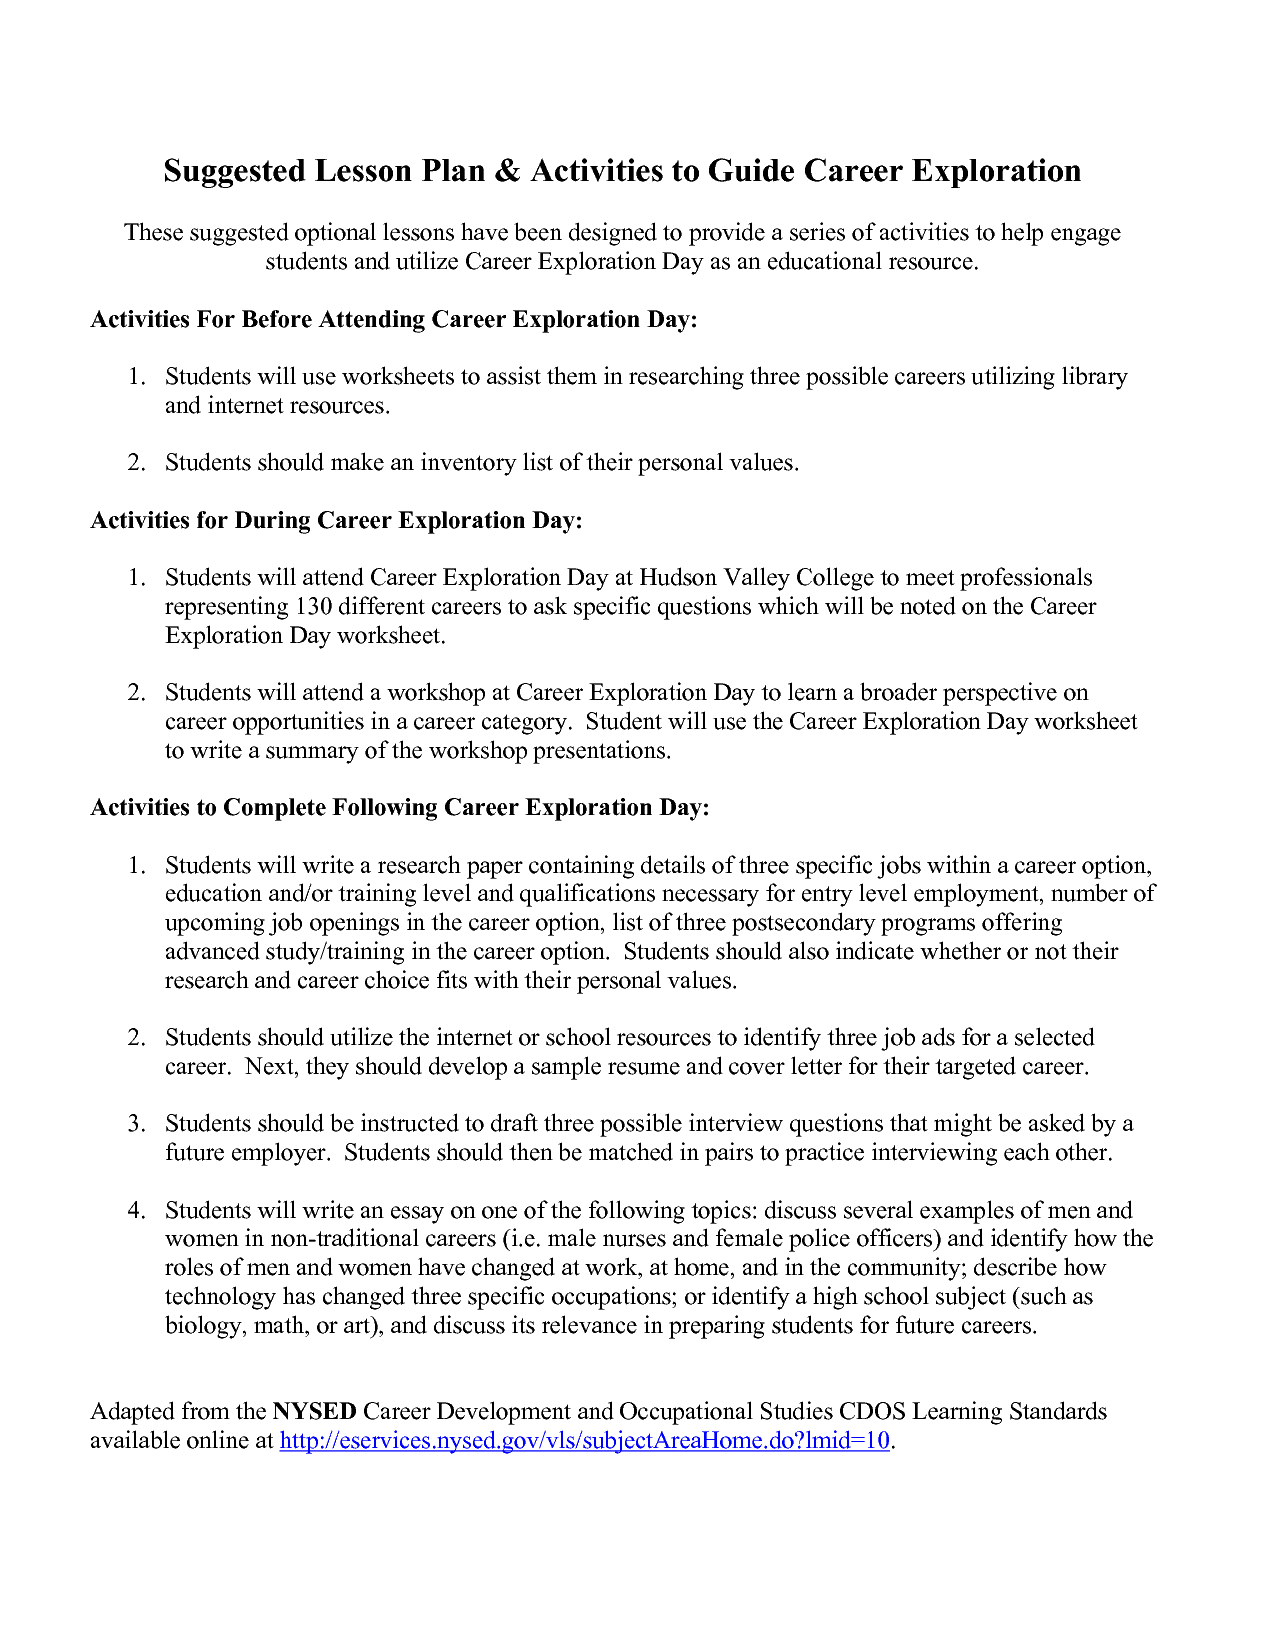 020 Research Paper Career Exploration Example Worksheets